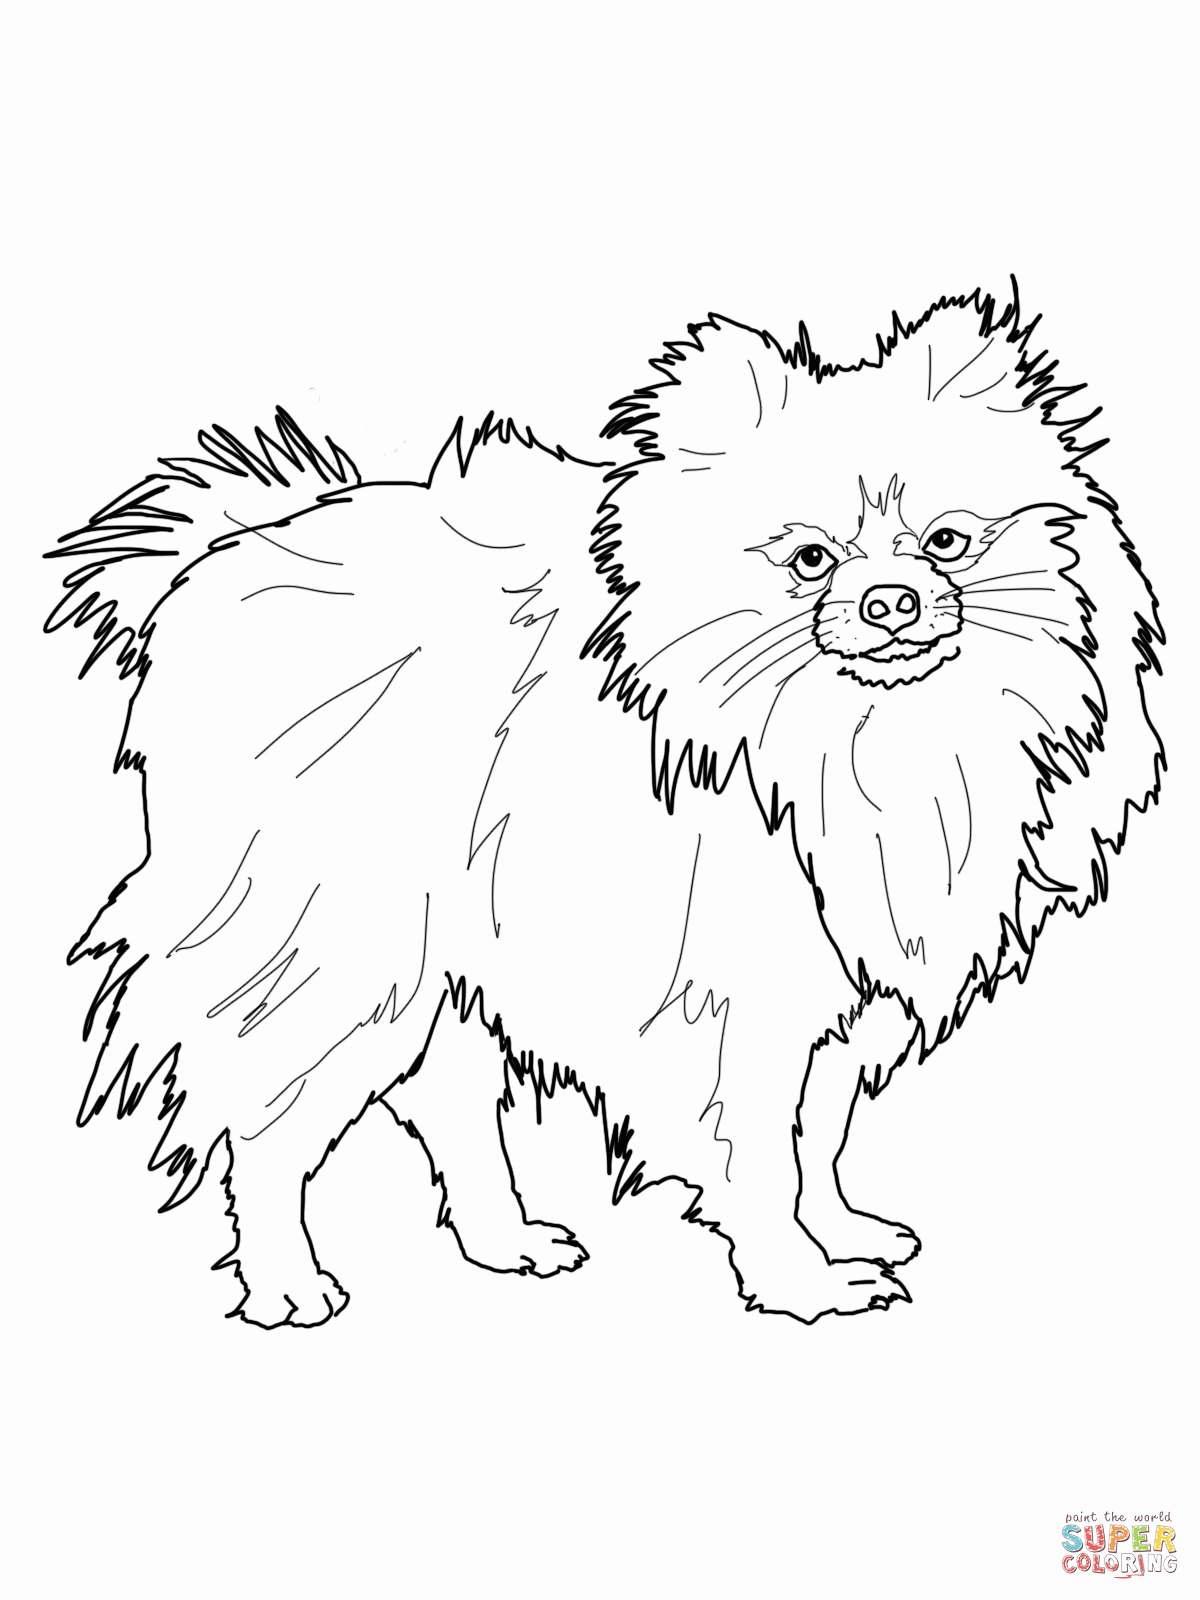 Pomeranian Coloring Page - Coloring Home